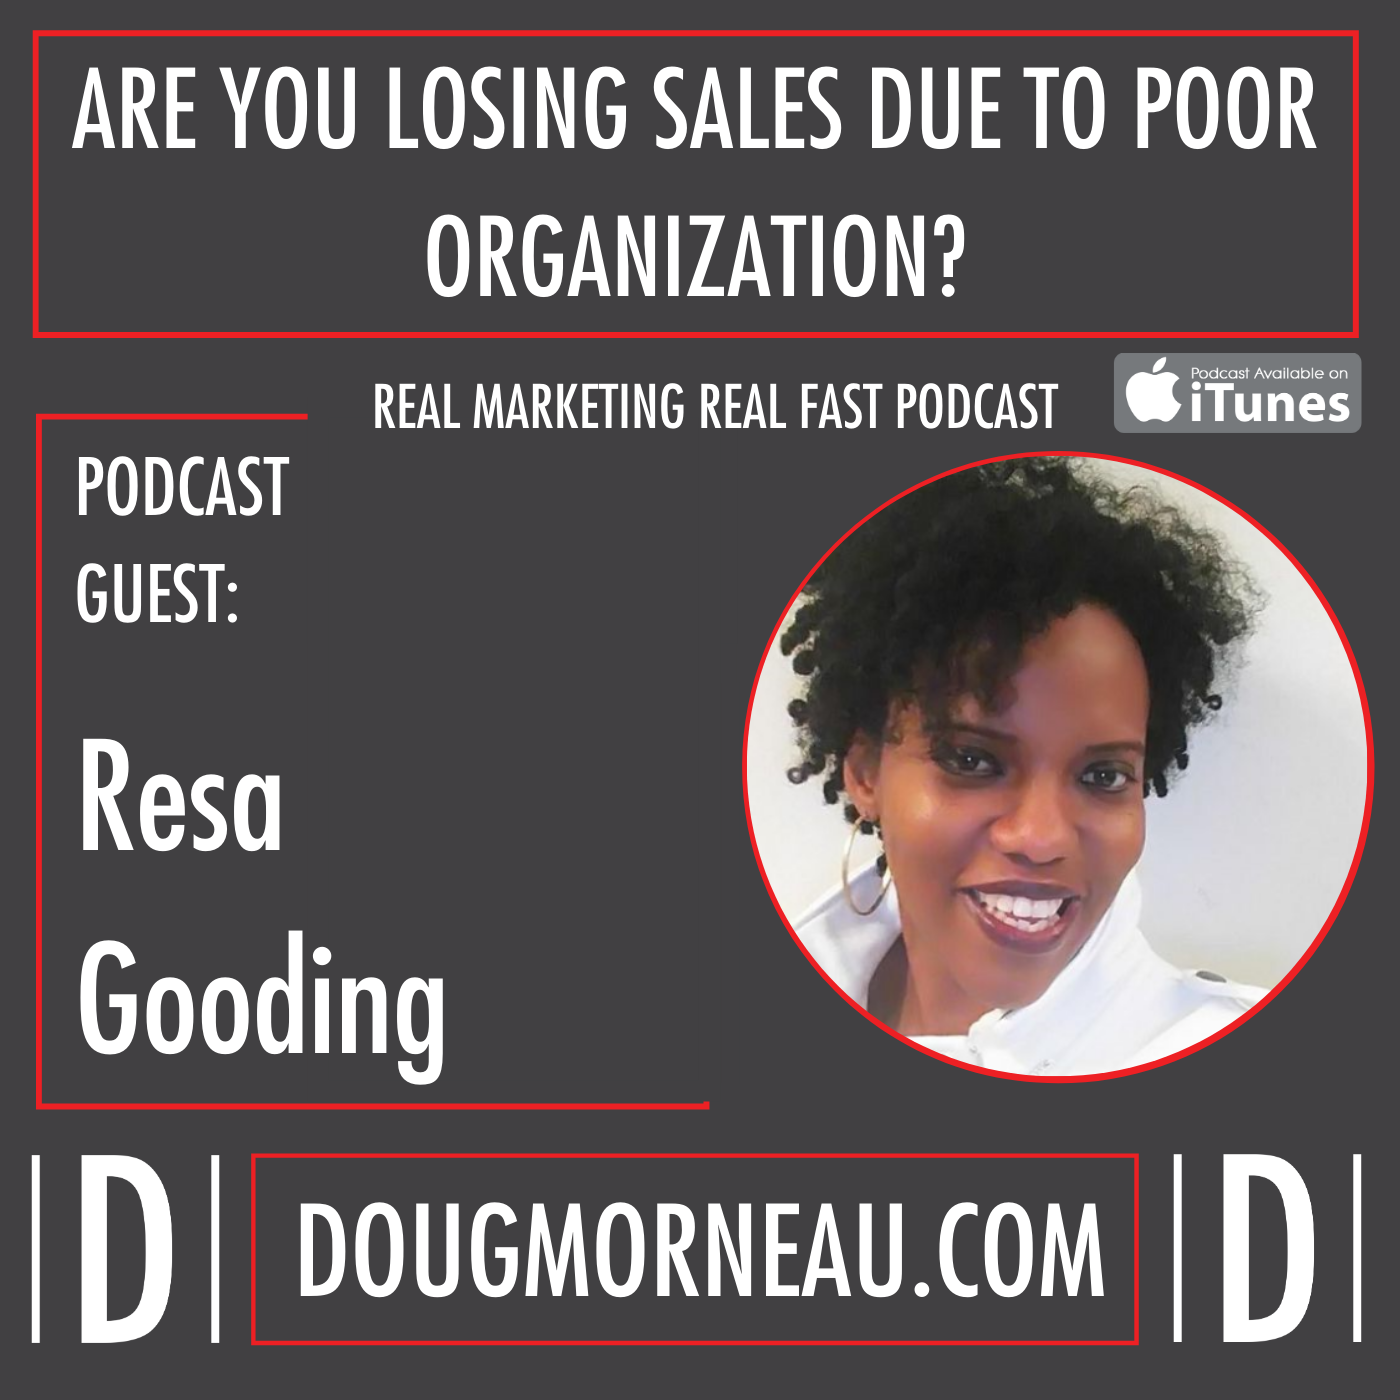 ARE YOU LOSING SALES DUE TO POOR ORGANIZATION? RESA GOODING - DOUG MORNEAU - REAL MARKETING REAL FAST PODCAST